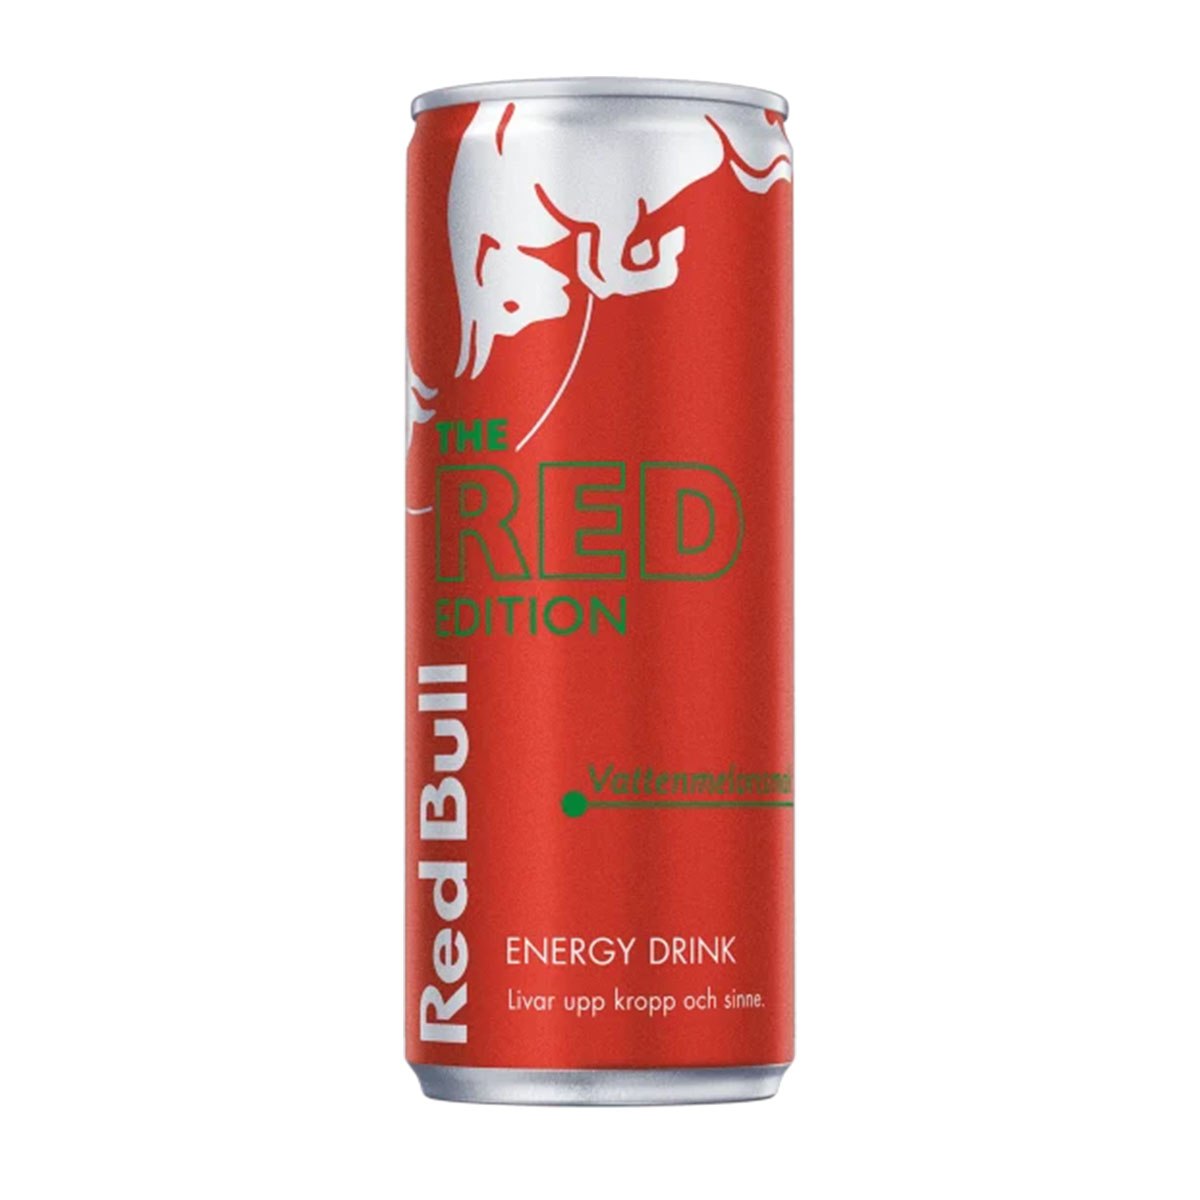 Energidryck Red Bull red edition 25 cl